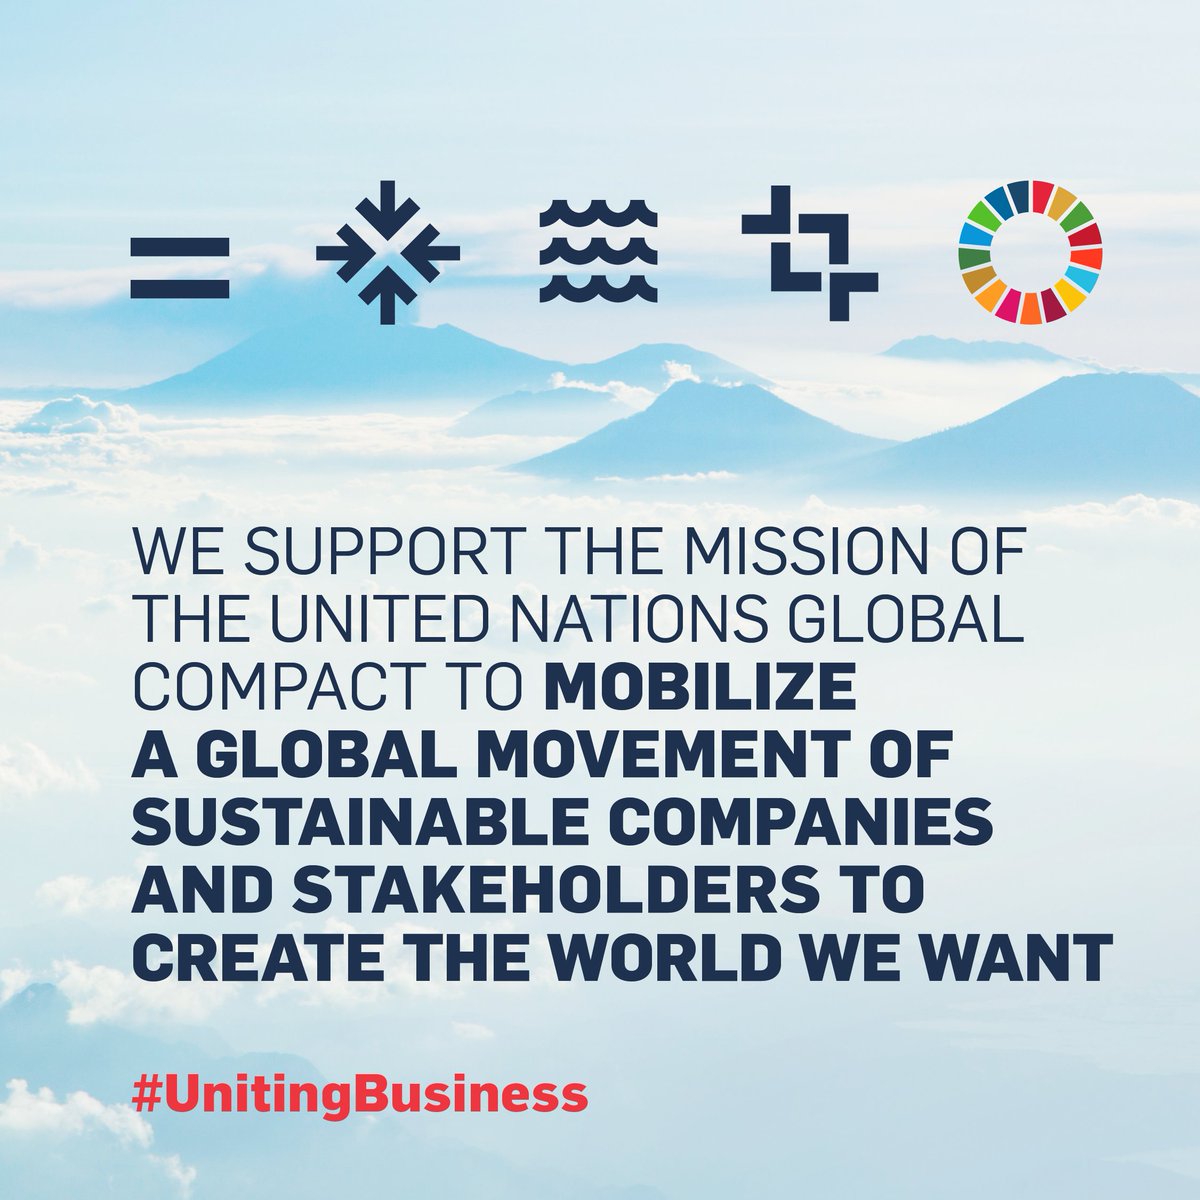 Tod’s Group is proud to join the United Nations Global Compact, the largest strategic sustainability and corporate citizenship initiative in the world, straightening its commitment to responsible and sustainable management of business processes. #UnitingBusiness @globalcompact